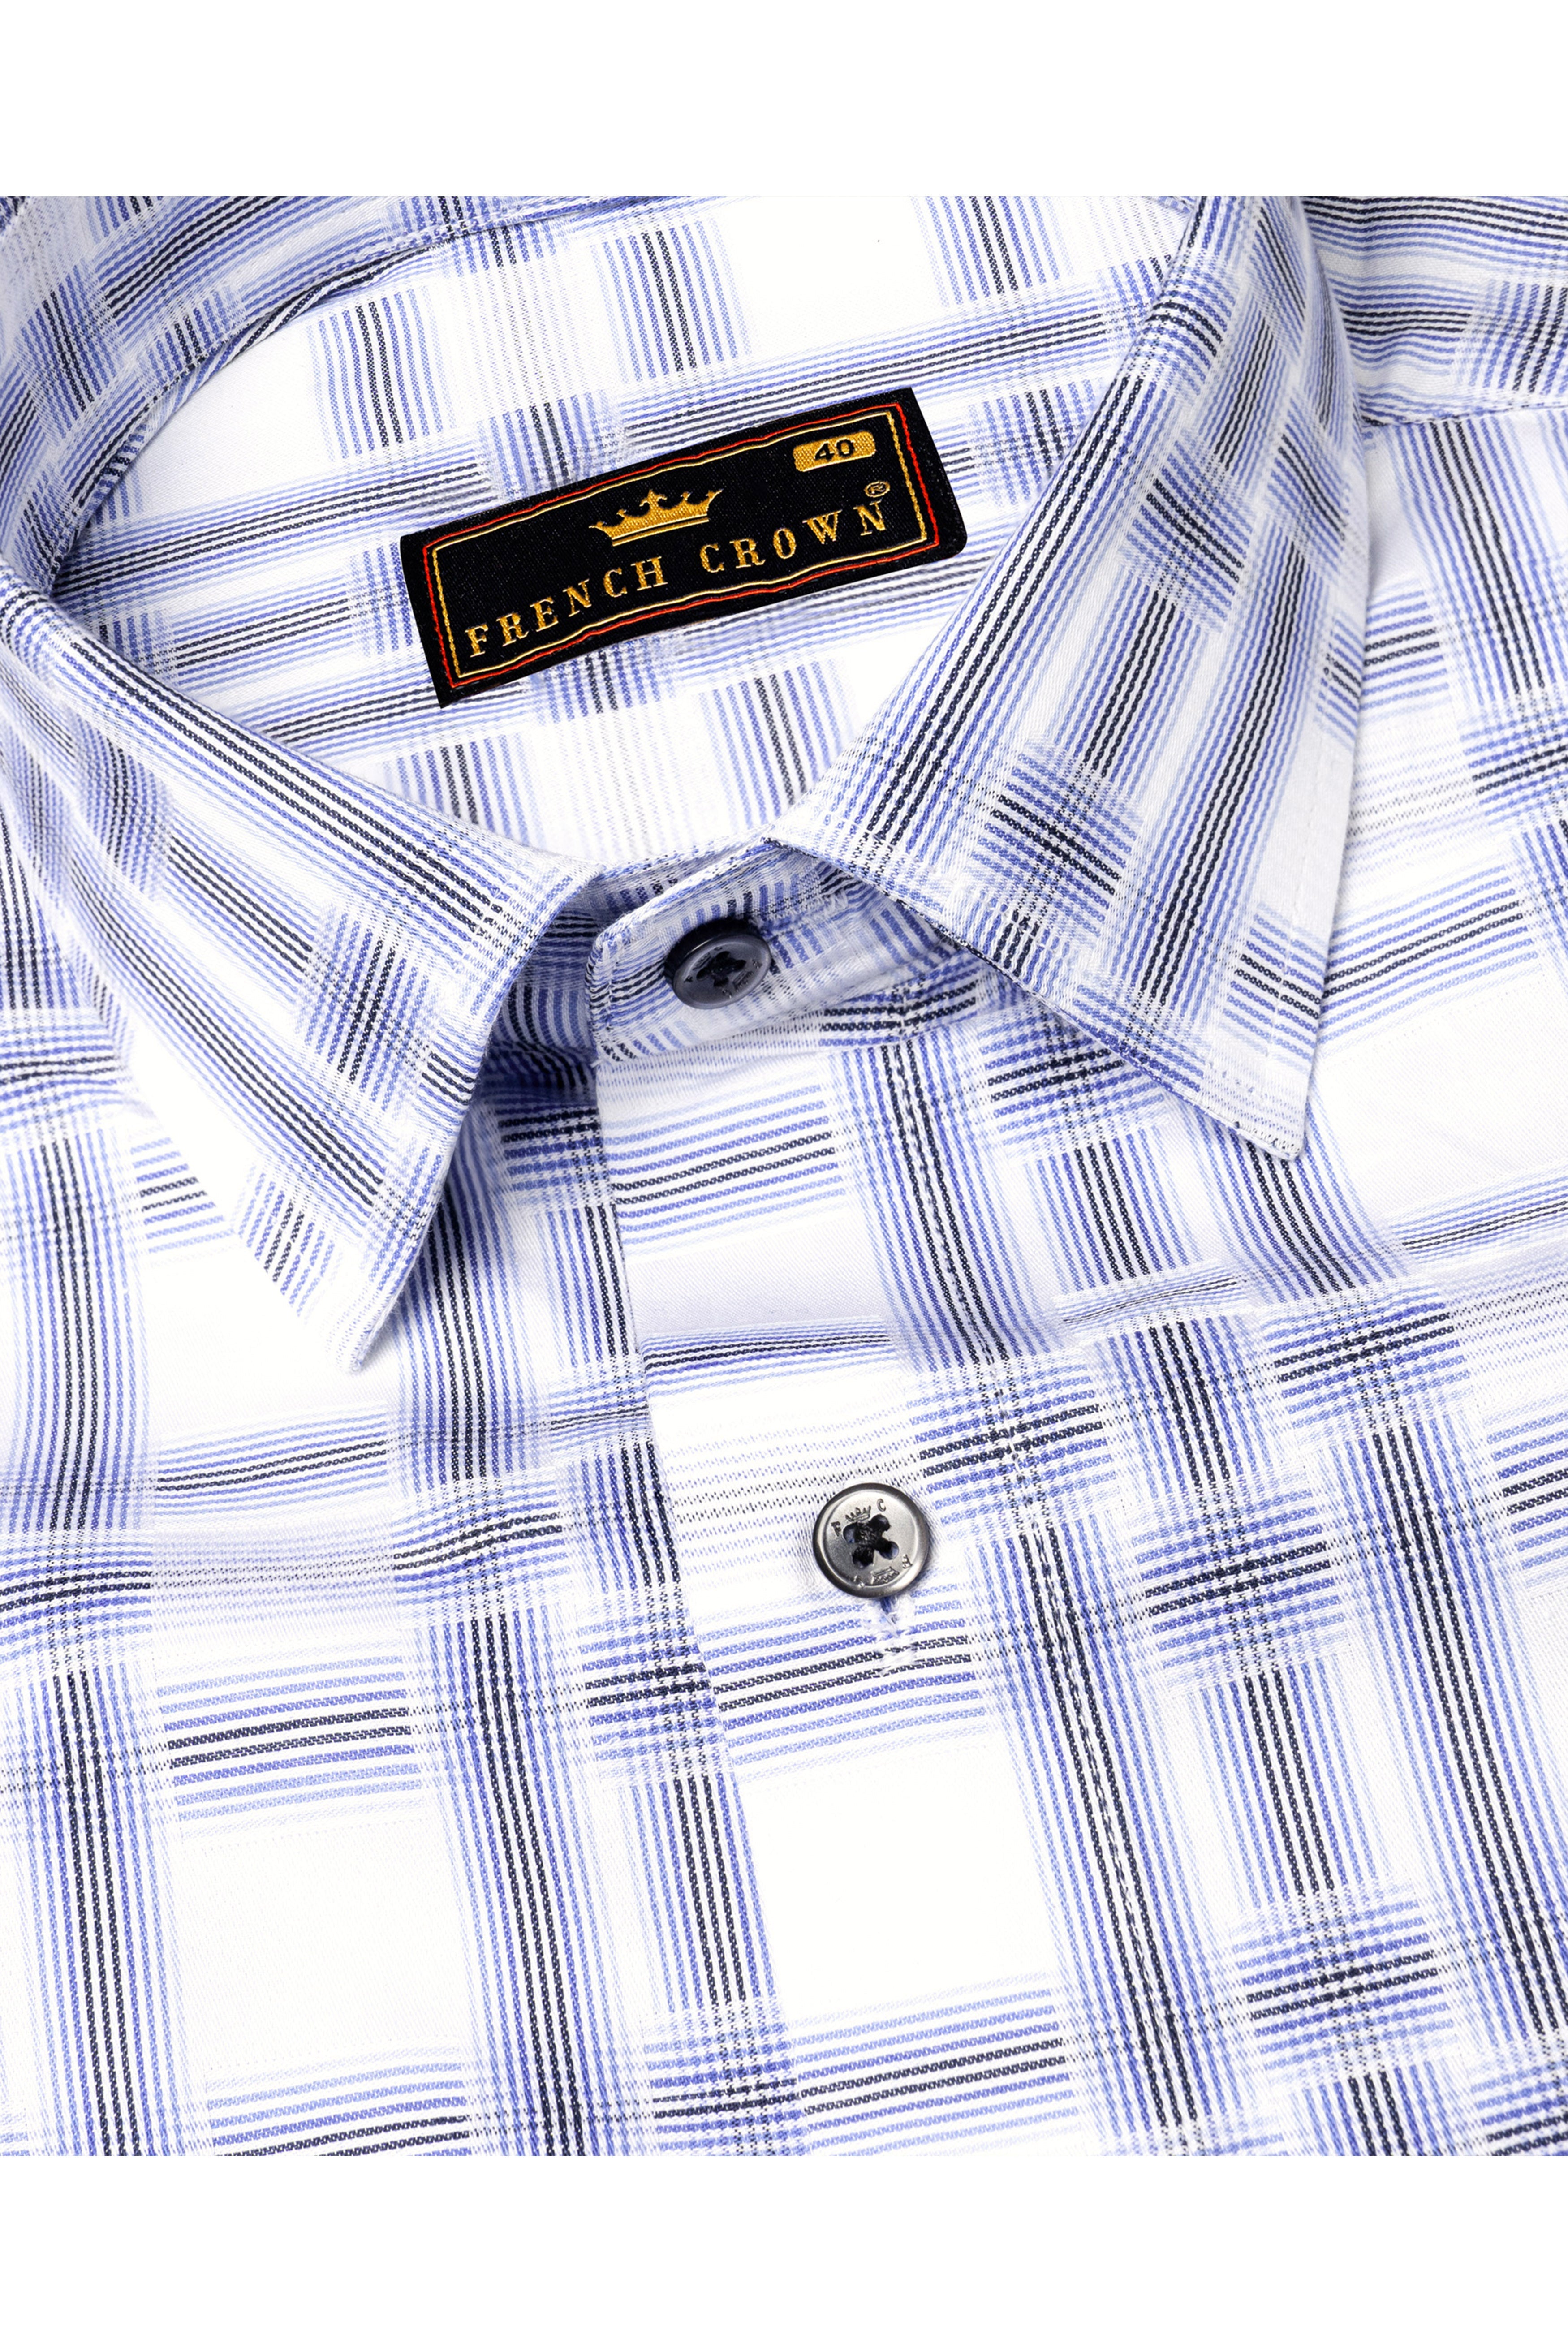 Bright White with Light Pastel Blue Checkered with Funky Patch Work Dobby Premium Giza Cotton Designer Shirt